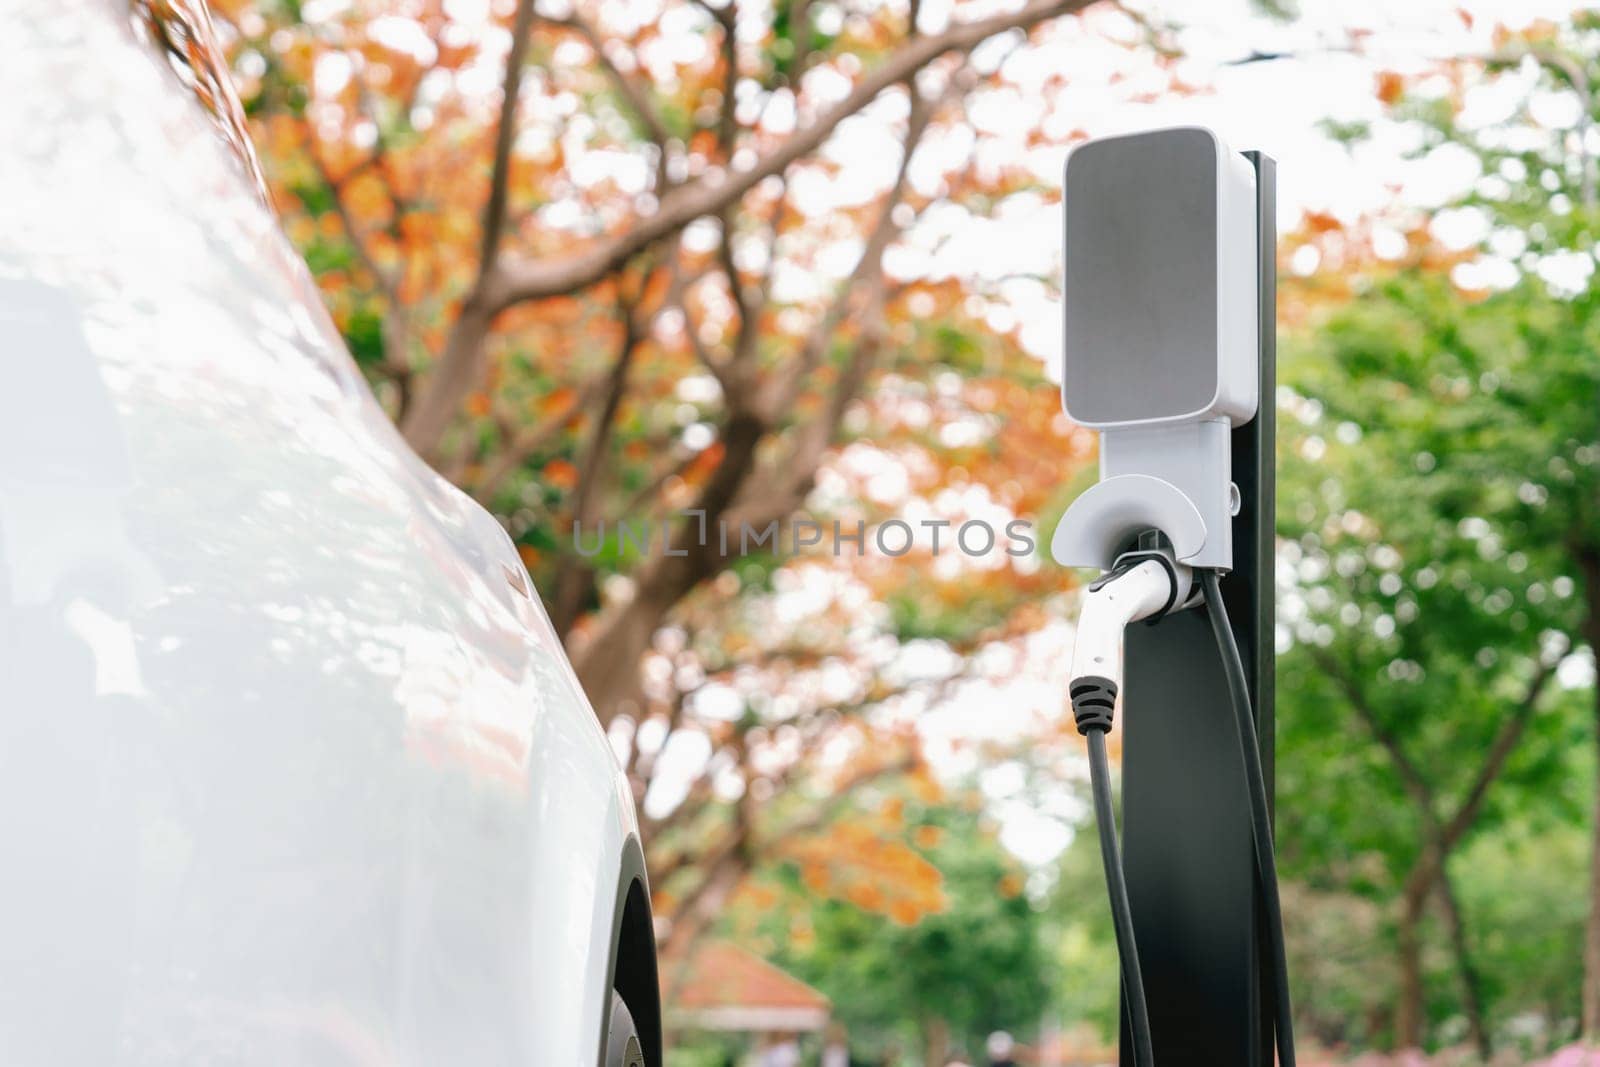 EV electric vehicle recharging battery in autumnal national park. Exalt by biancoblue